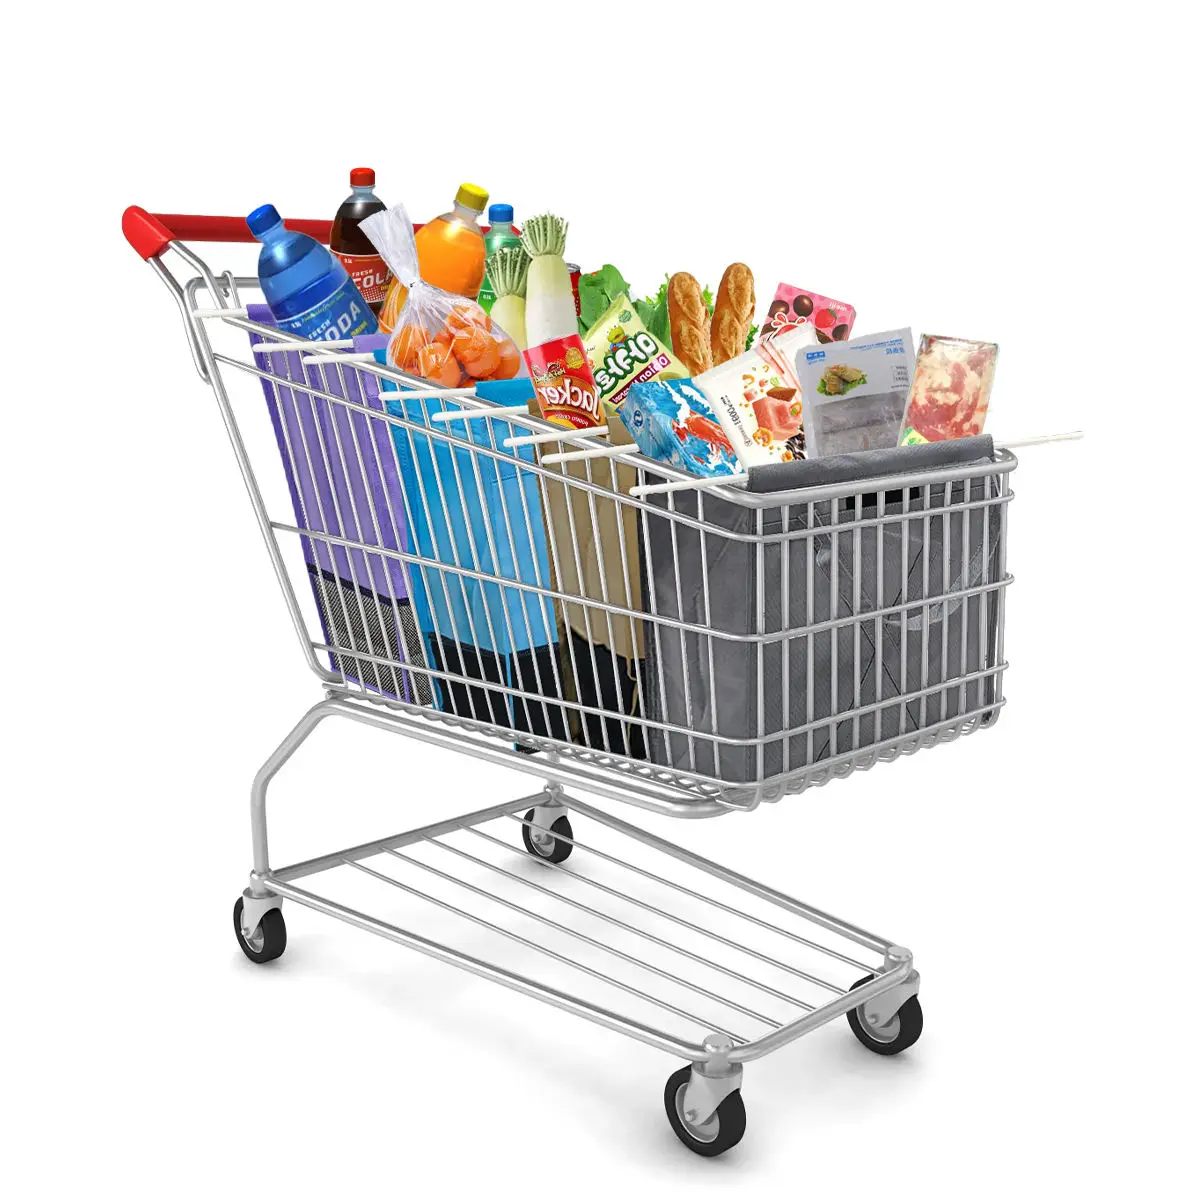 

Portable Non Woven Grocery Tote Reusable Grocery Shopping Cart Bags with COOLER Bag & Egg Foldable Trolley Bag